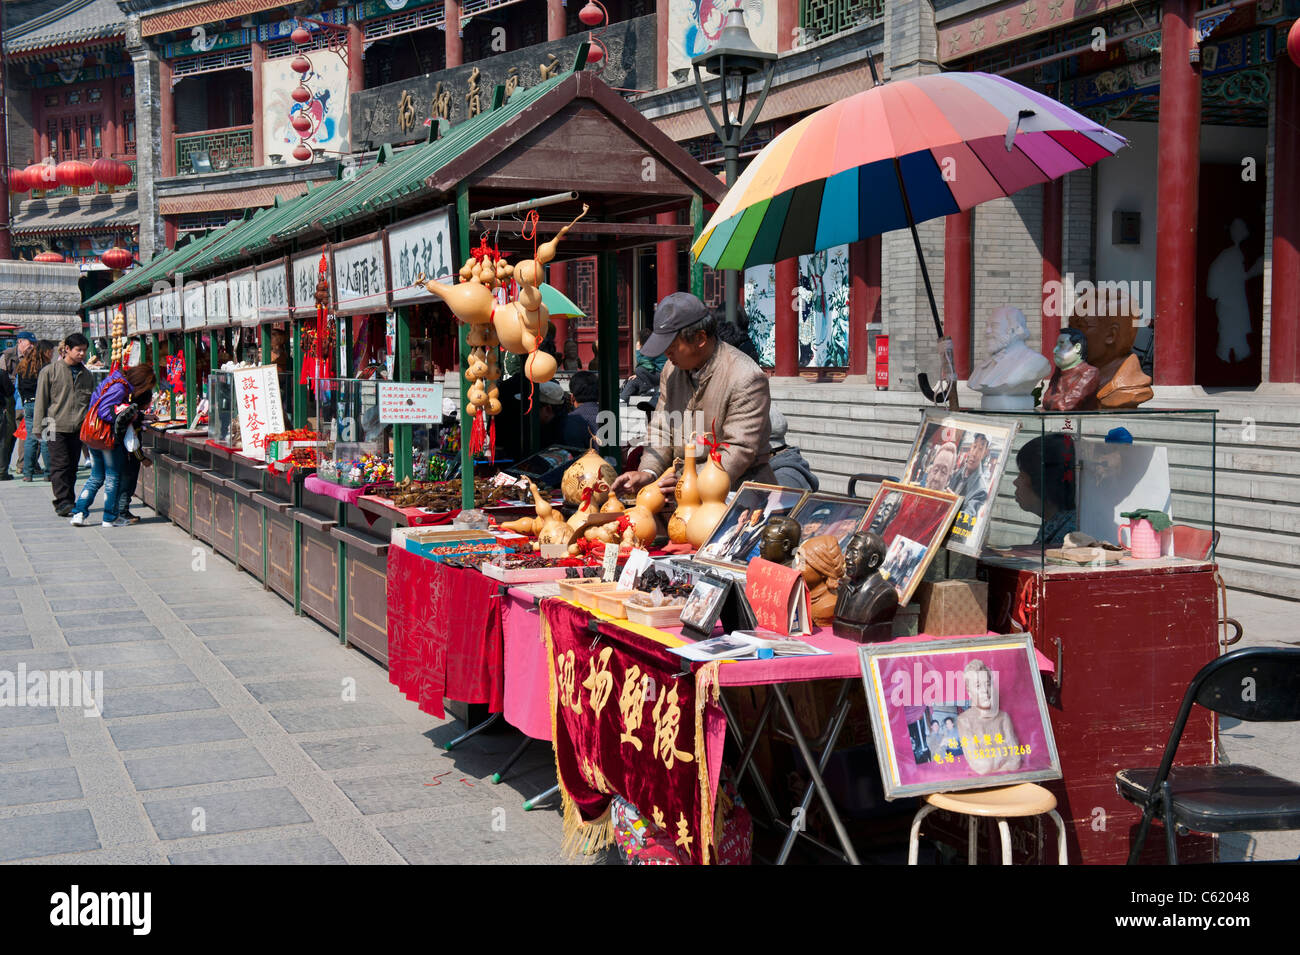 Market Stalls in Guwenhua Jie  Ancient Culture Street, Tianjin, China Stock Photo